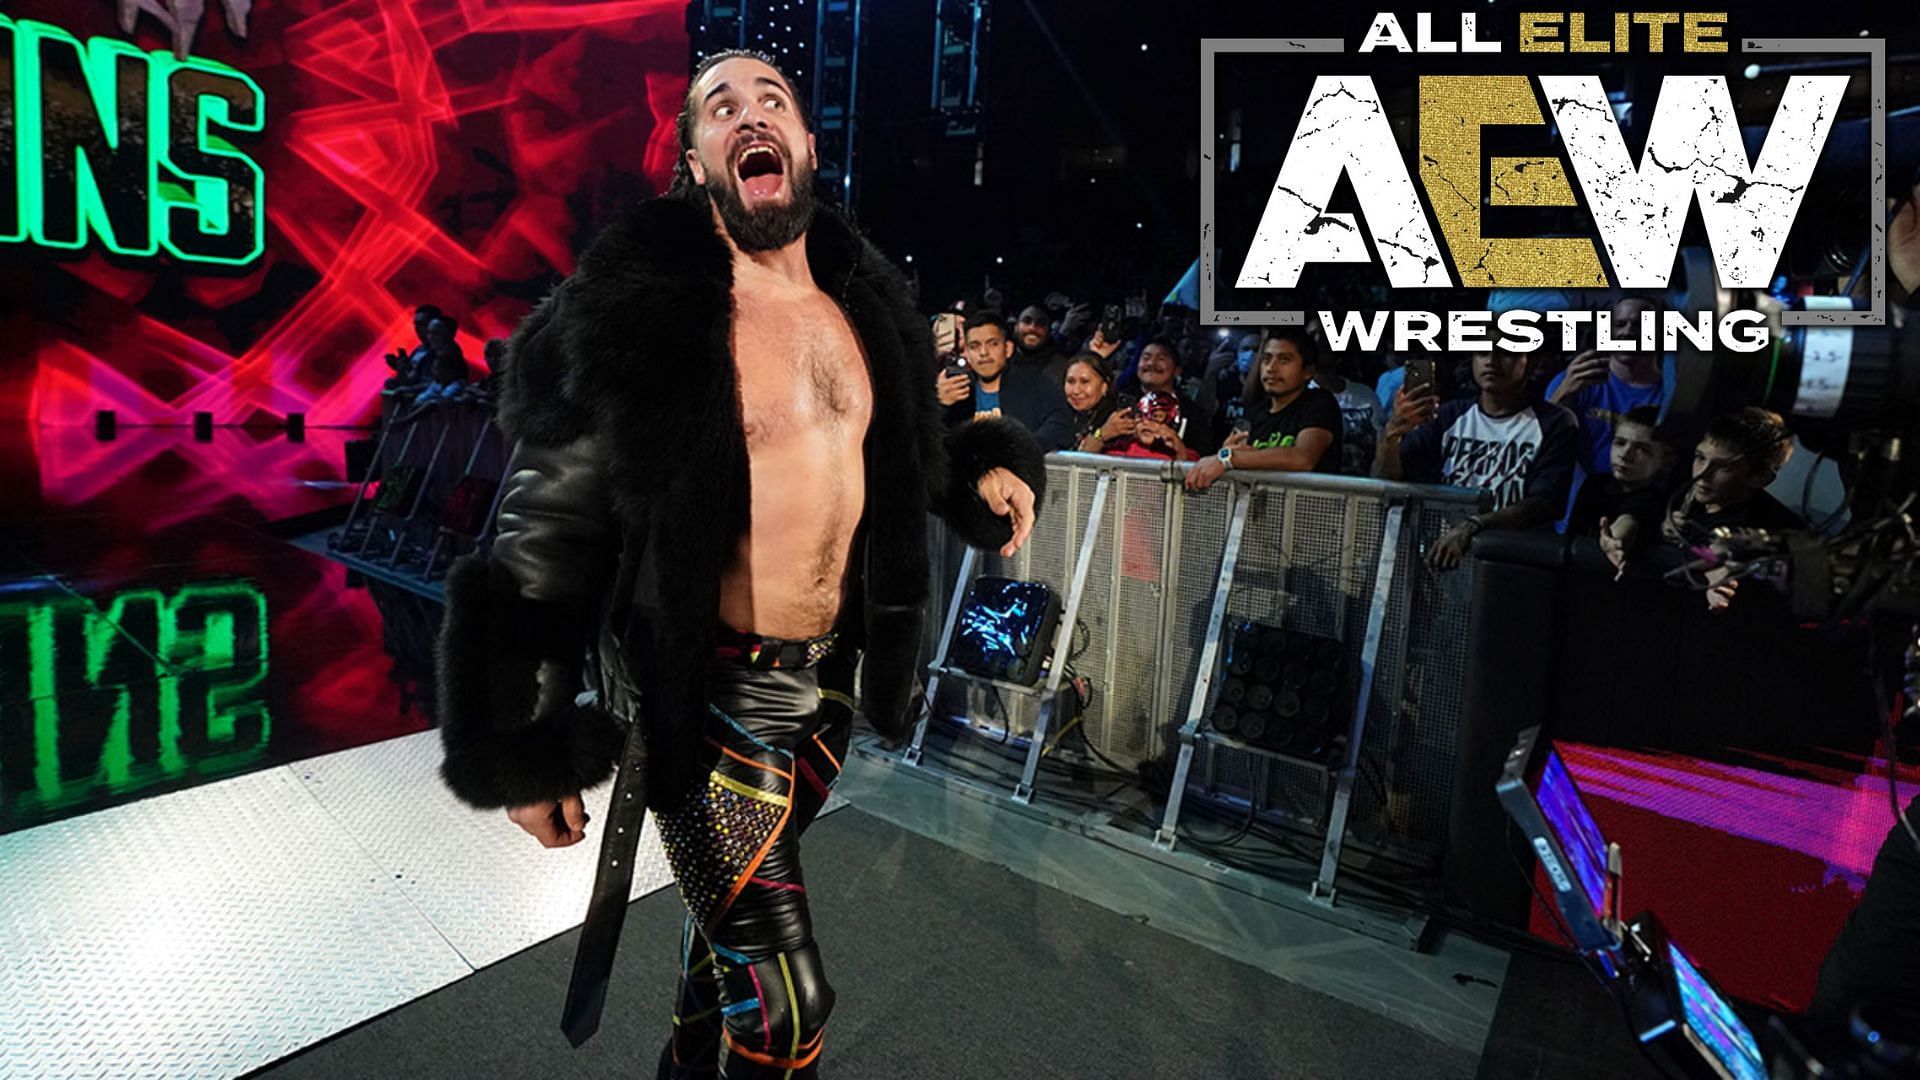 Does Seth Rollins have any ties to AEW?